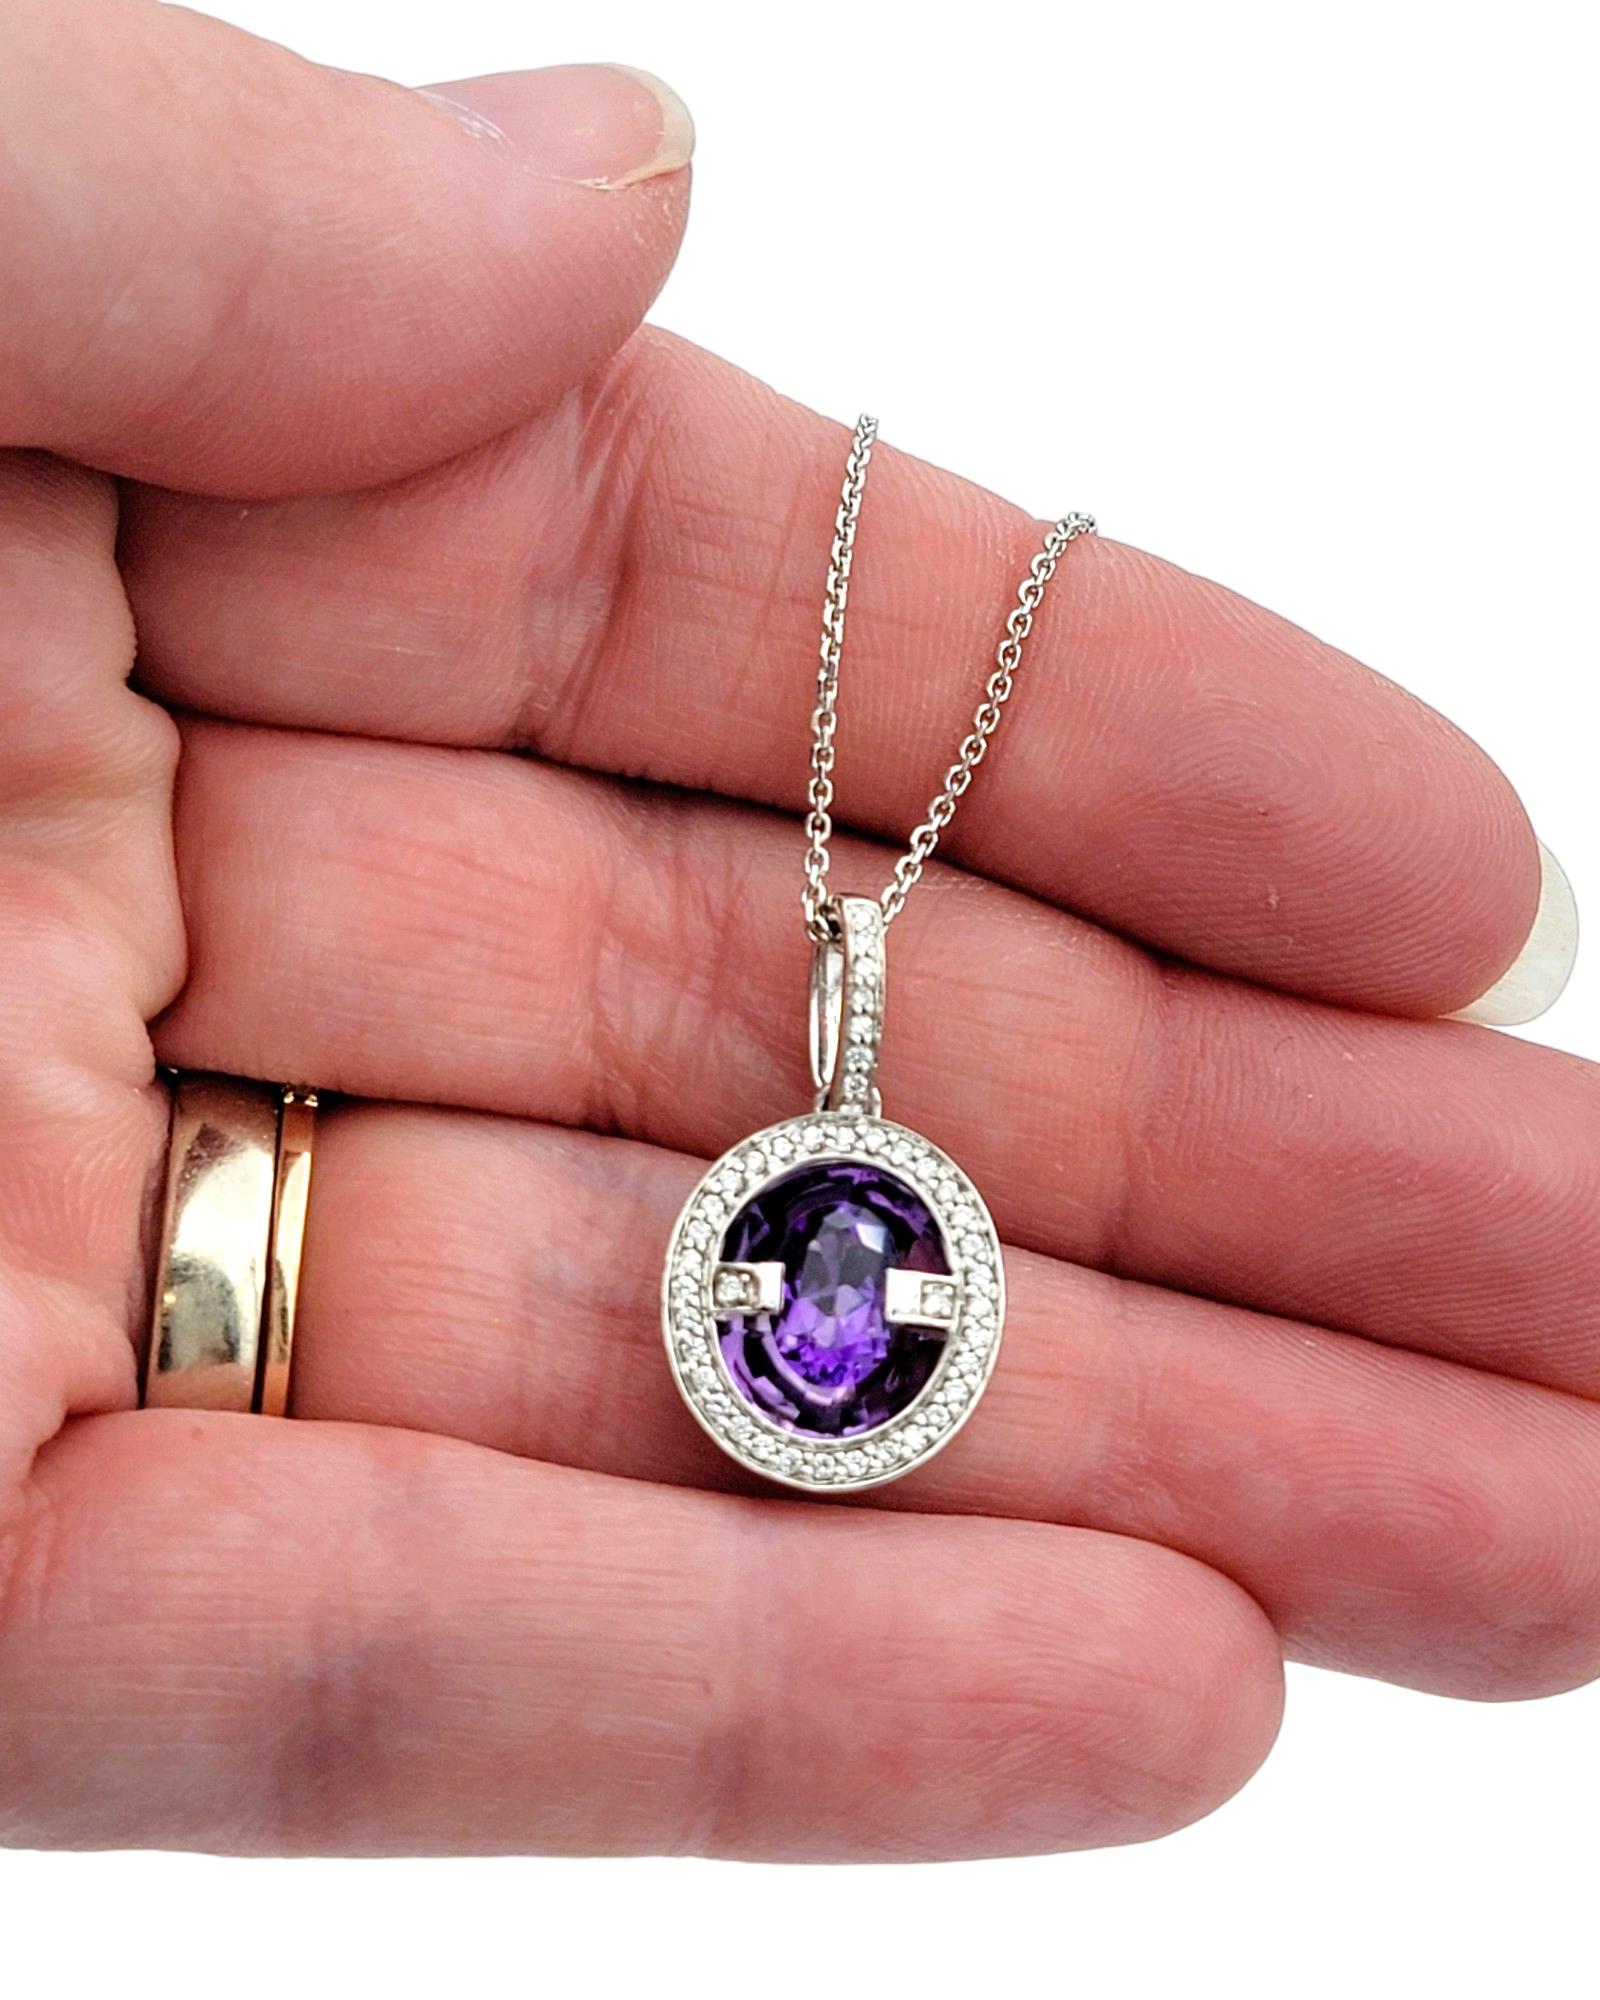 Floating Oval Amethyst and Diamond Pendant Necklace Set in 14 Karat White Gold For Sale 3